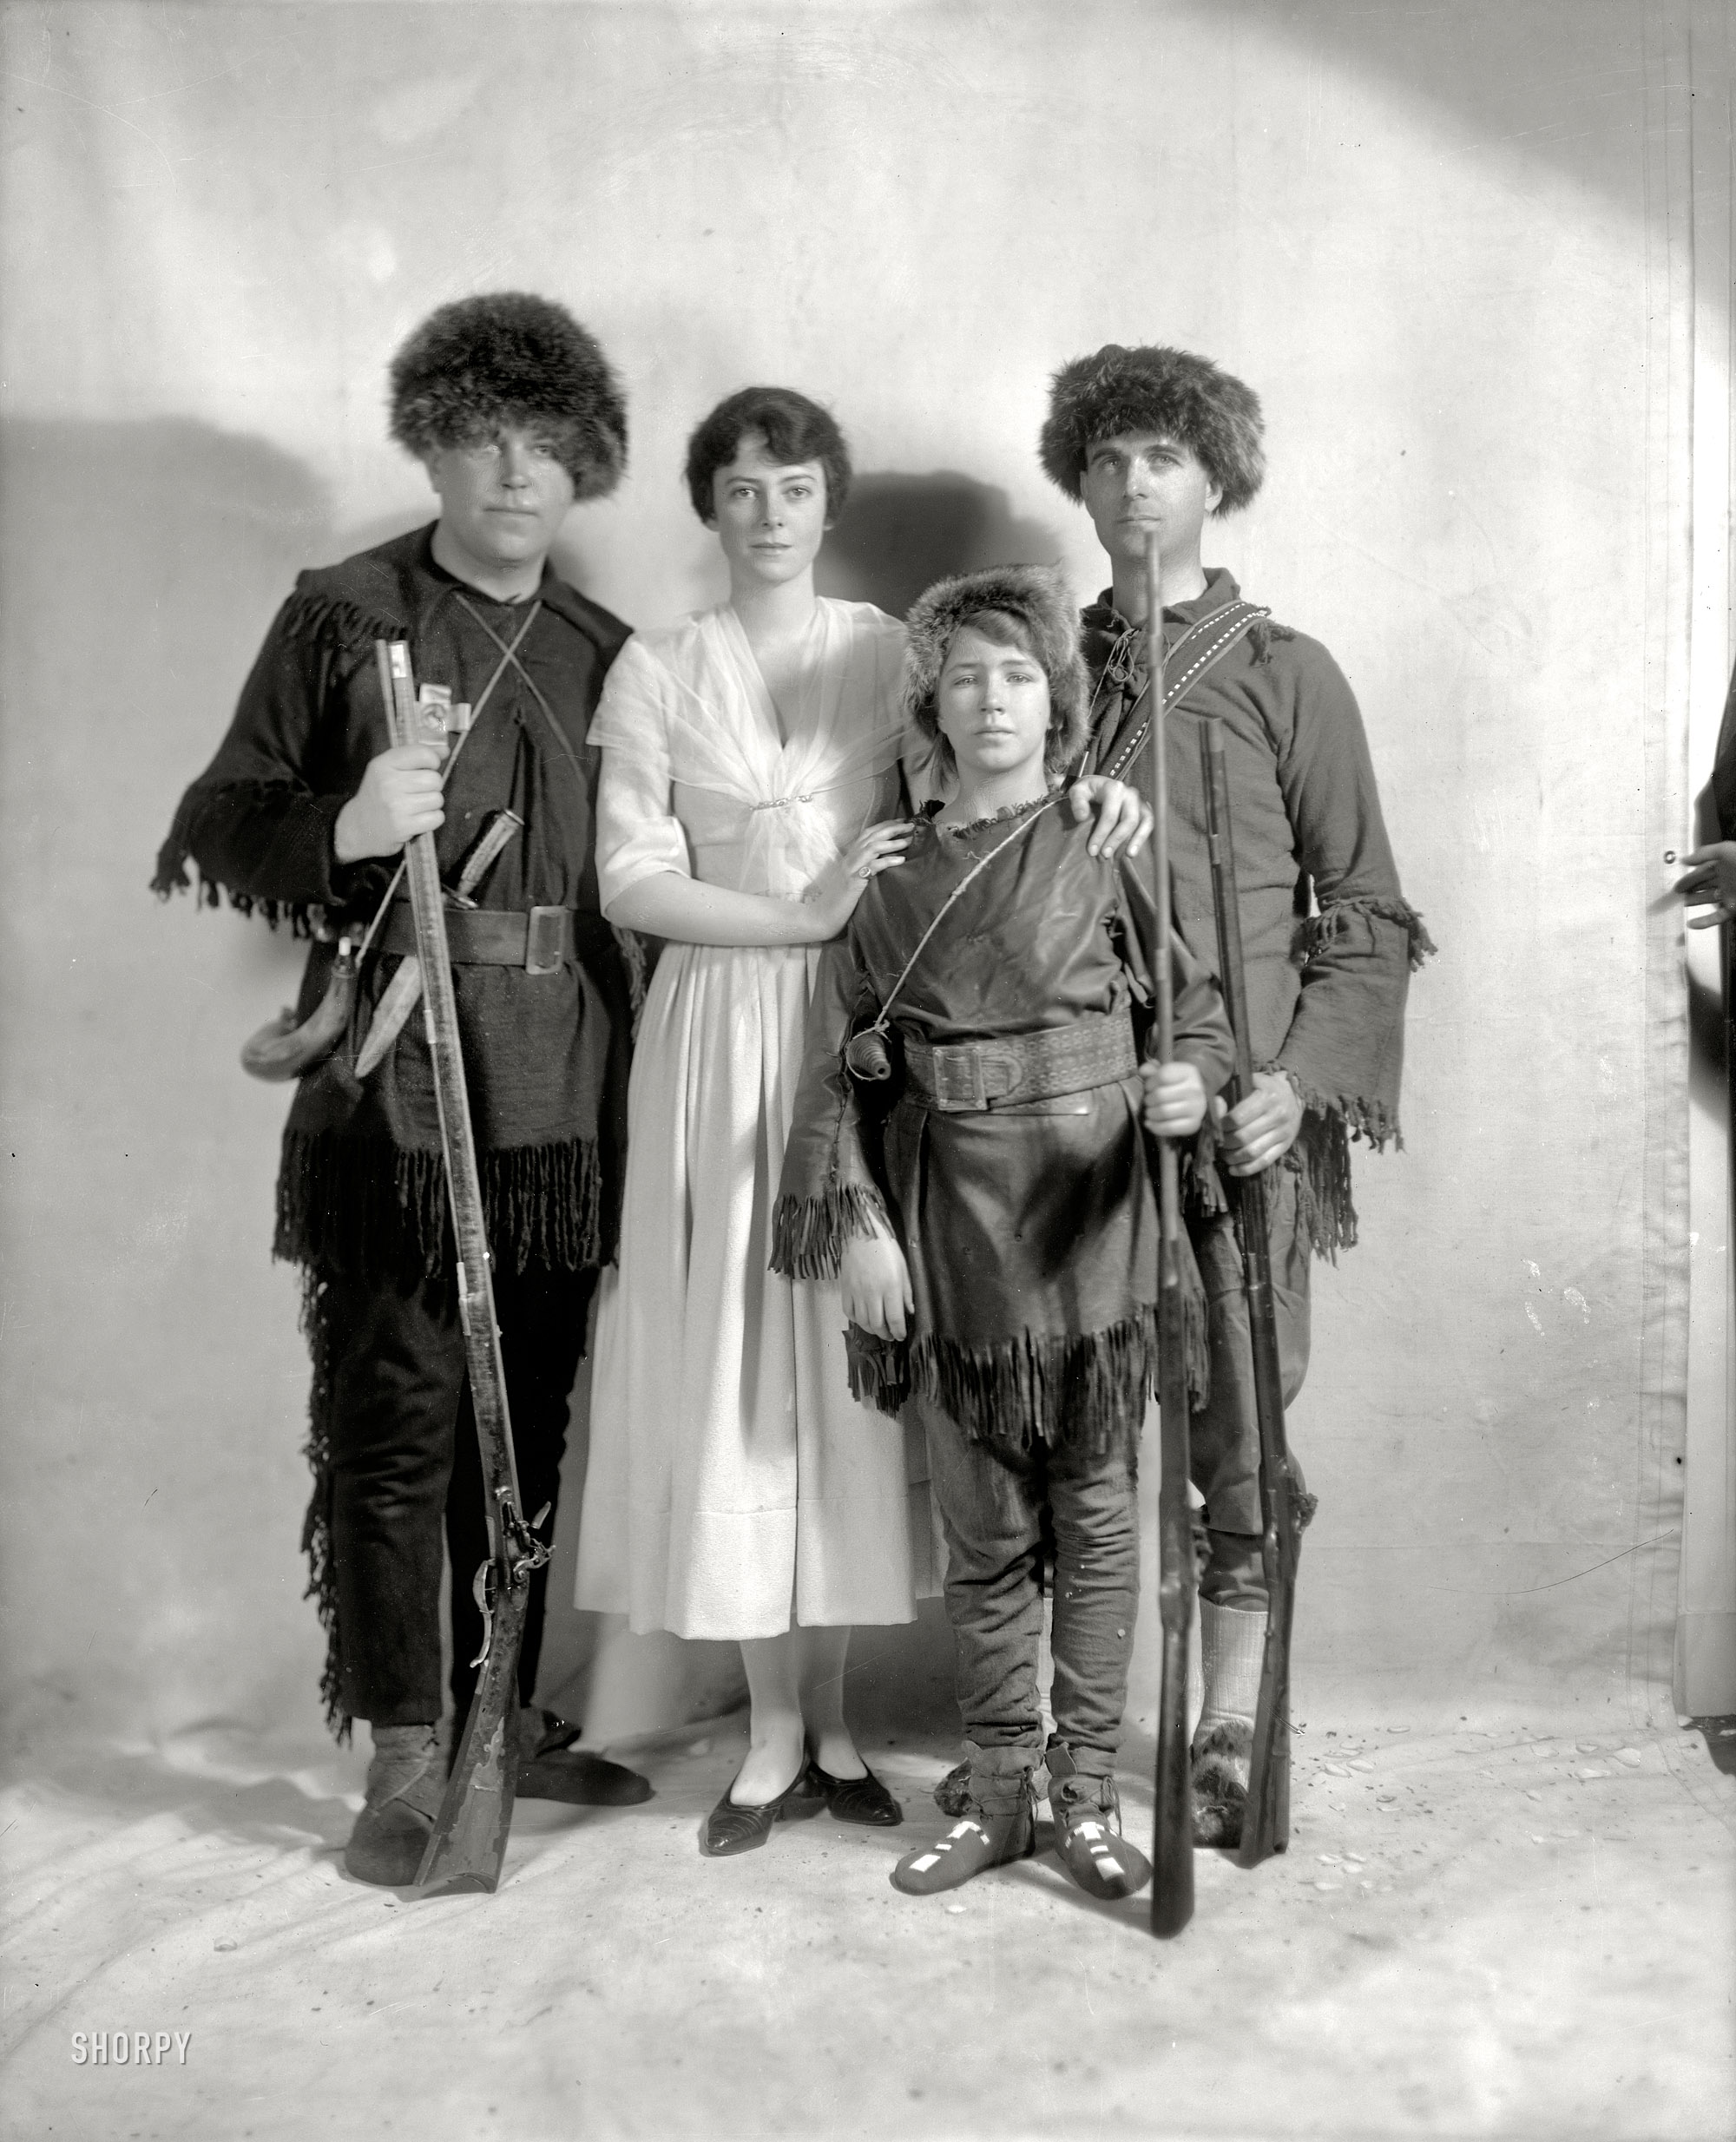 Washington, D.C., circa 1923. "Daniel Boone group." When I was a kid I had all their albums. Harris & Ewing Collection glass negative. View full size.